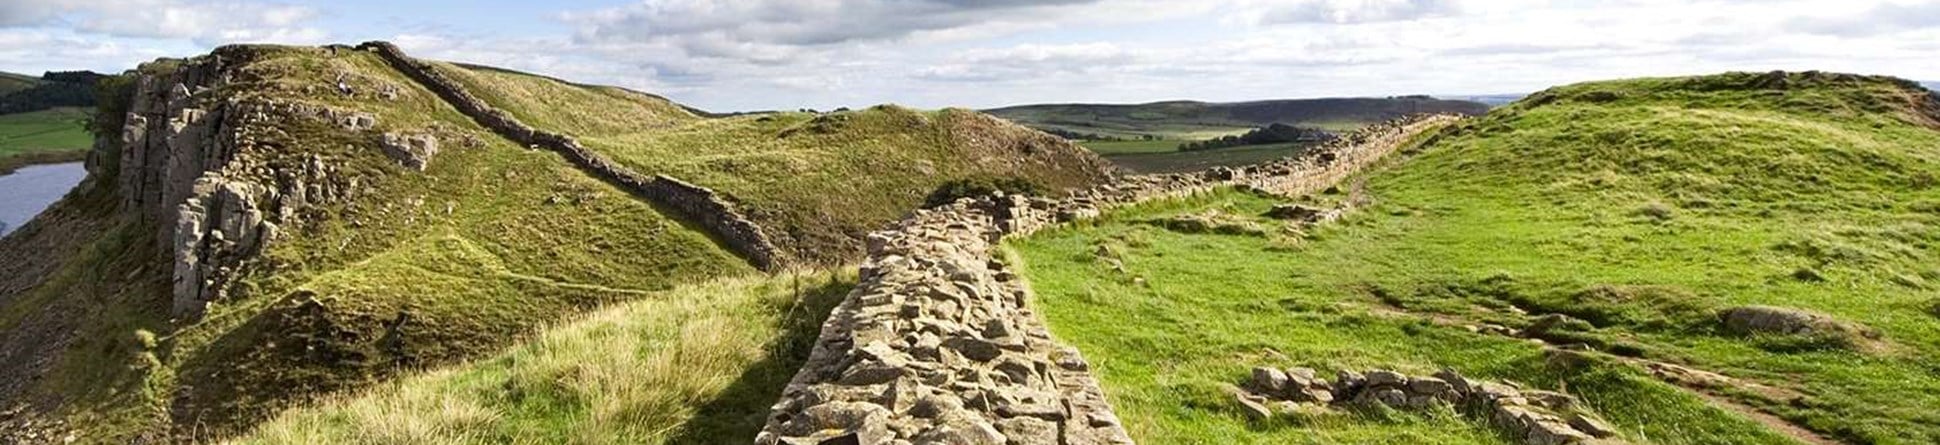 Panoramic view of Hadrian's Wall and surrounding landscape